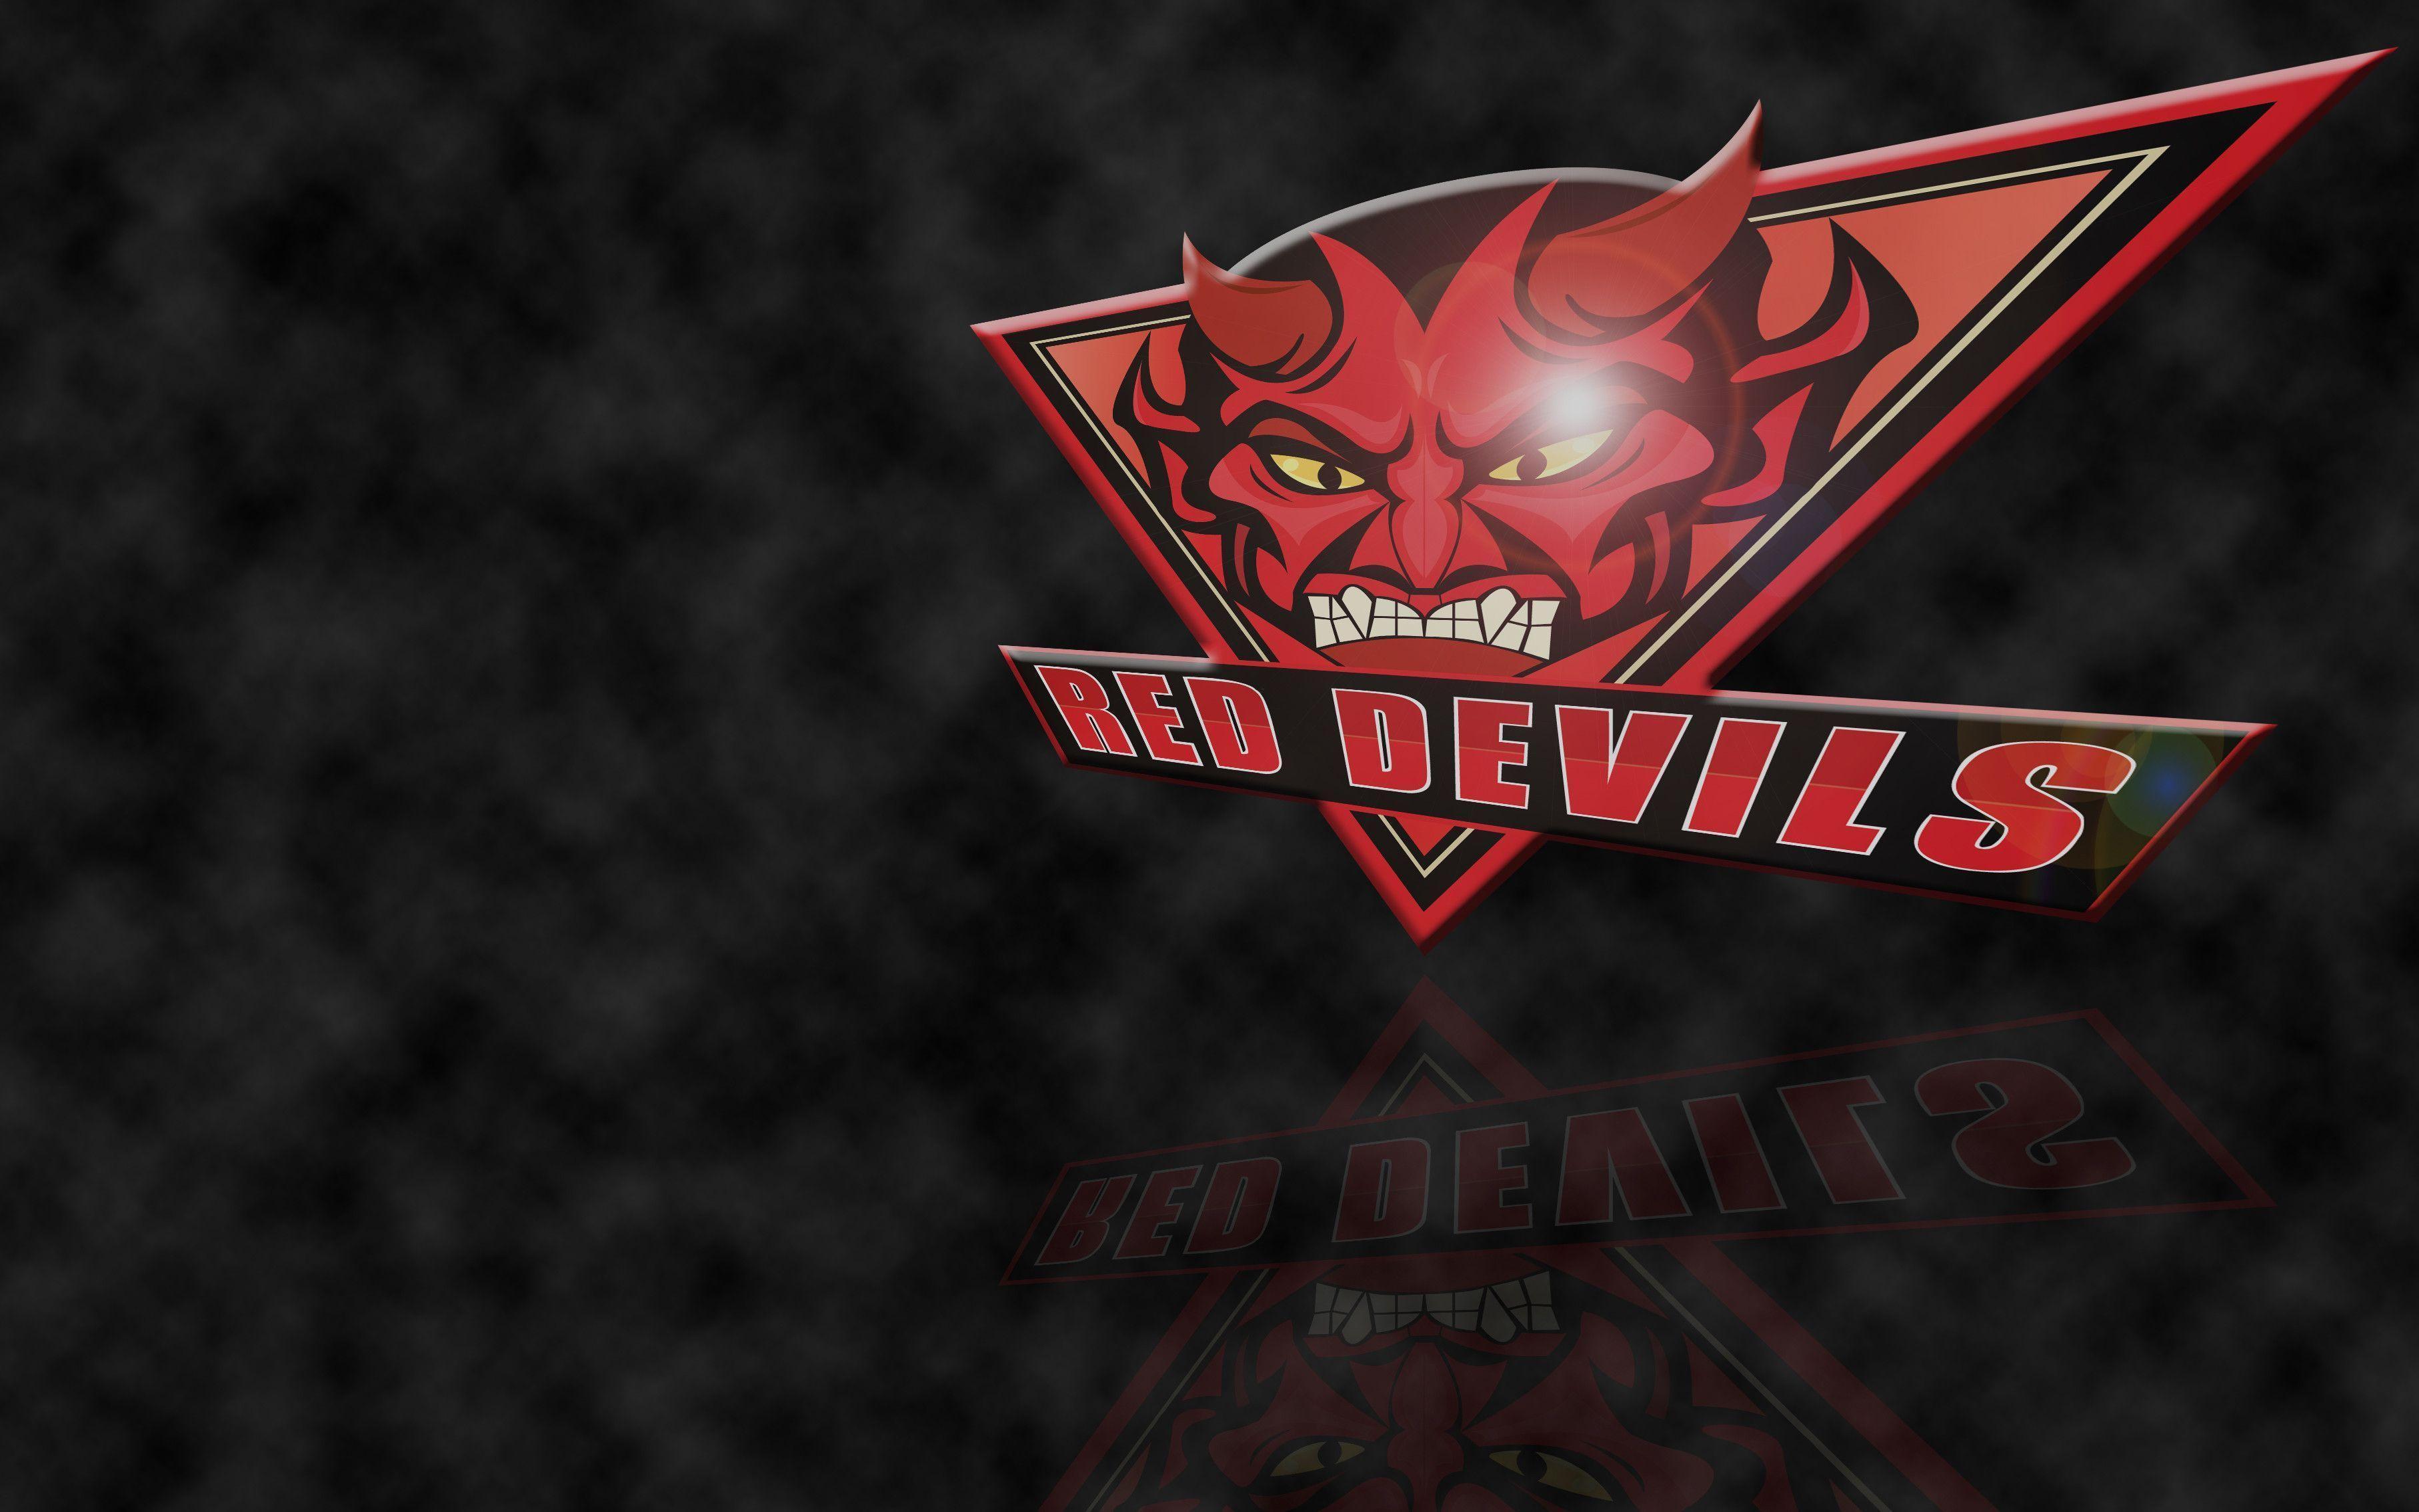 Downloads. The Red Devils RLFC